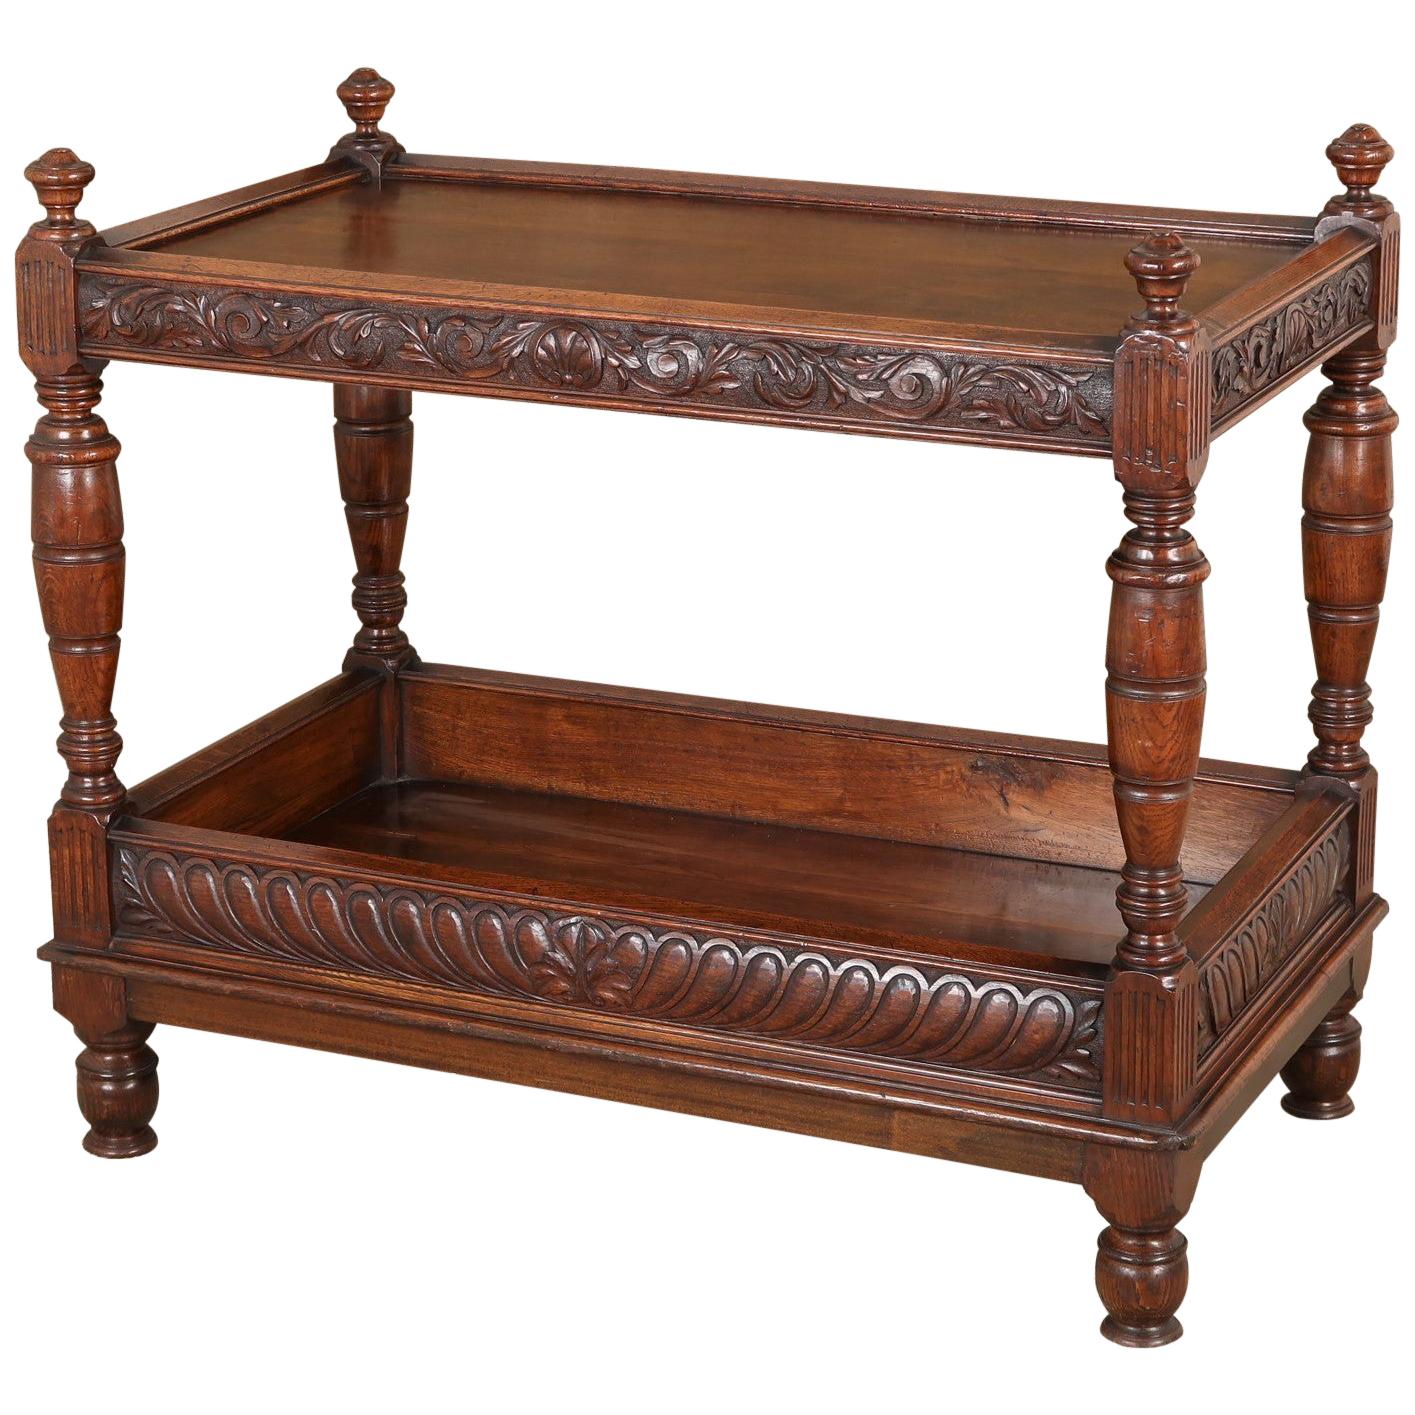 English Tudor Revival Oak Server with Exceptional Carvings, circa 1890 For Sale